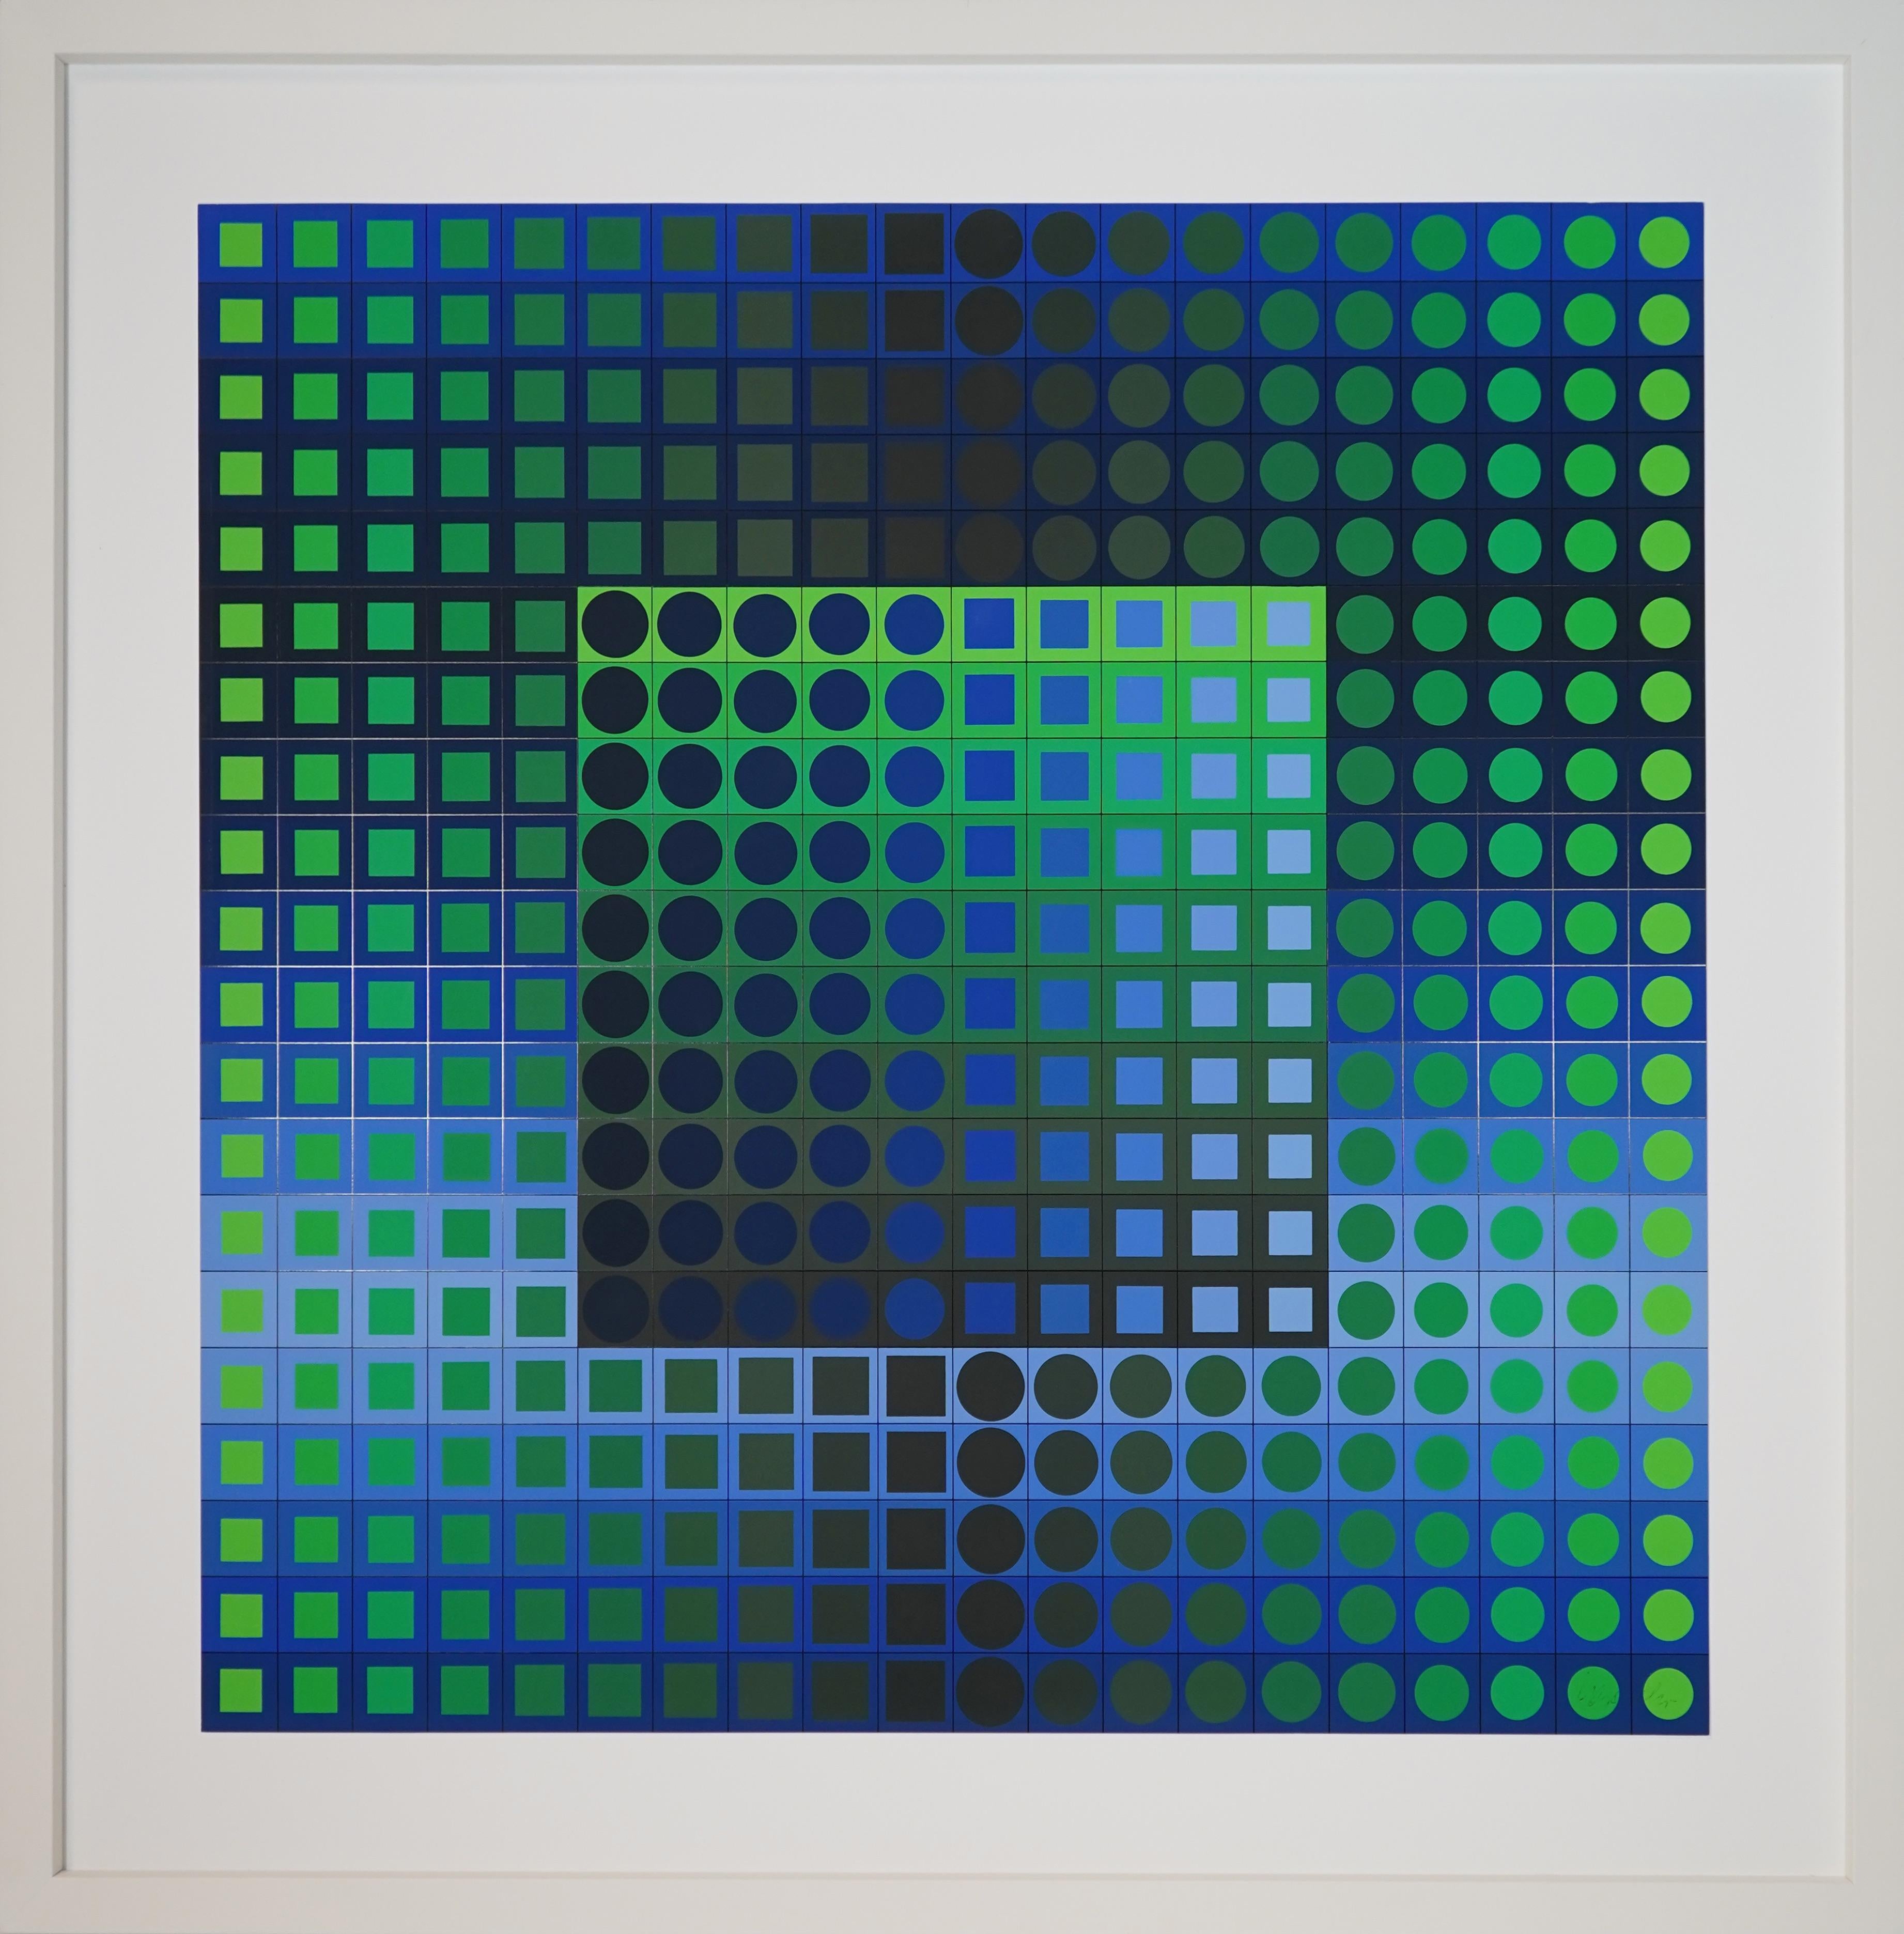 what materials did victor vasarely use